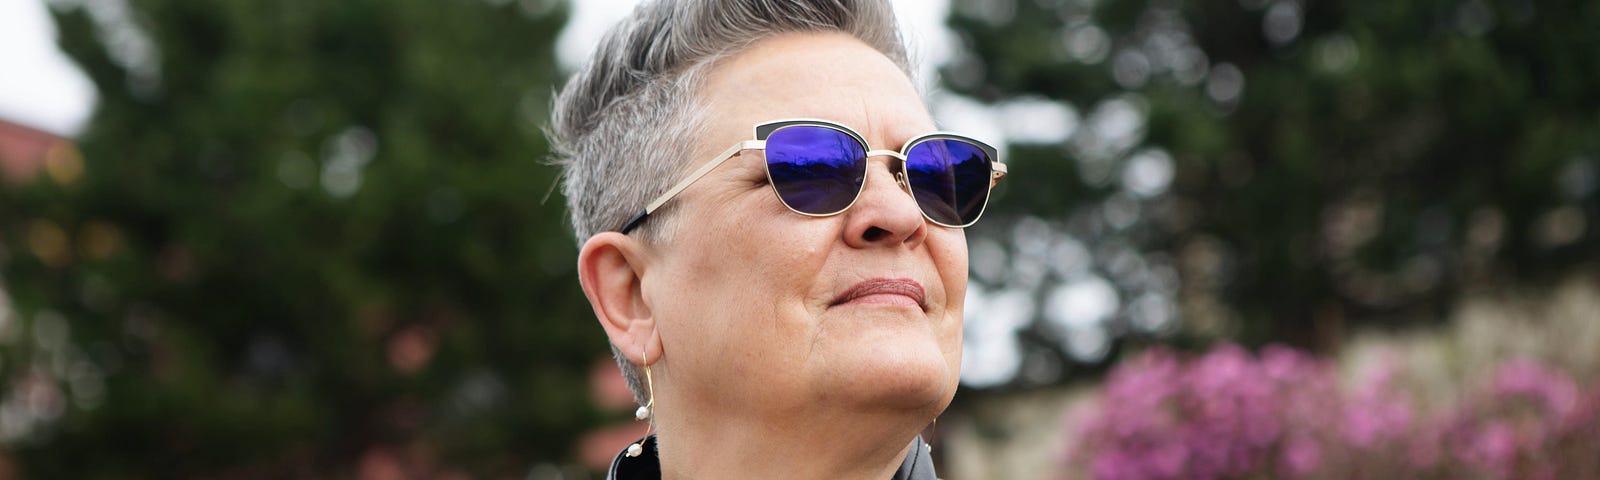 Older woman in a black leather jacket and sunglasses